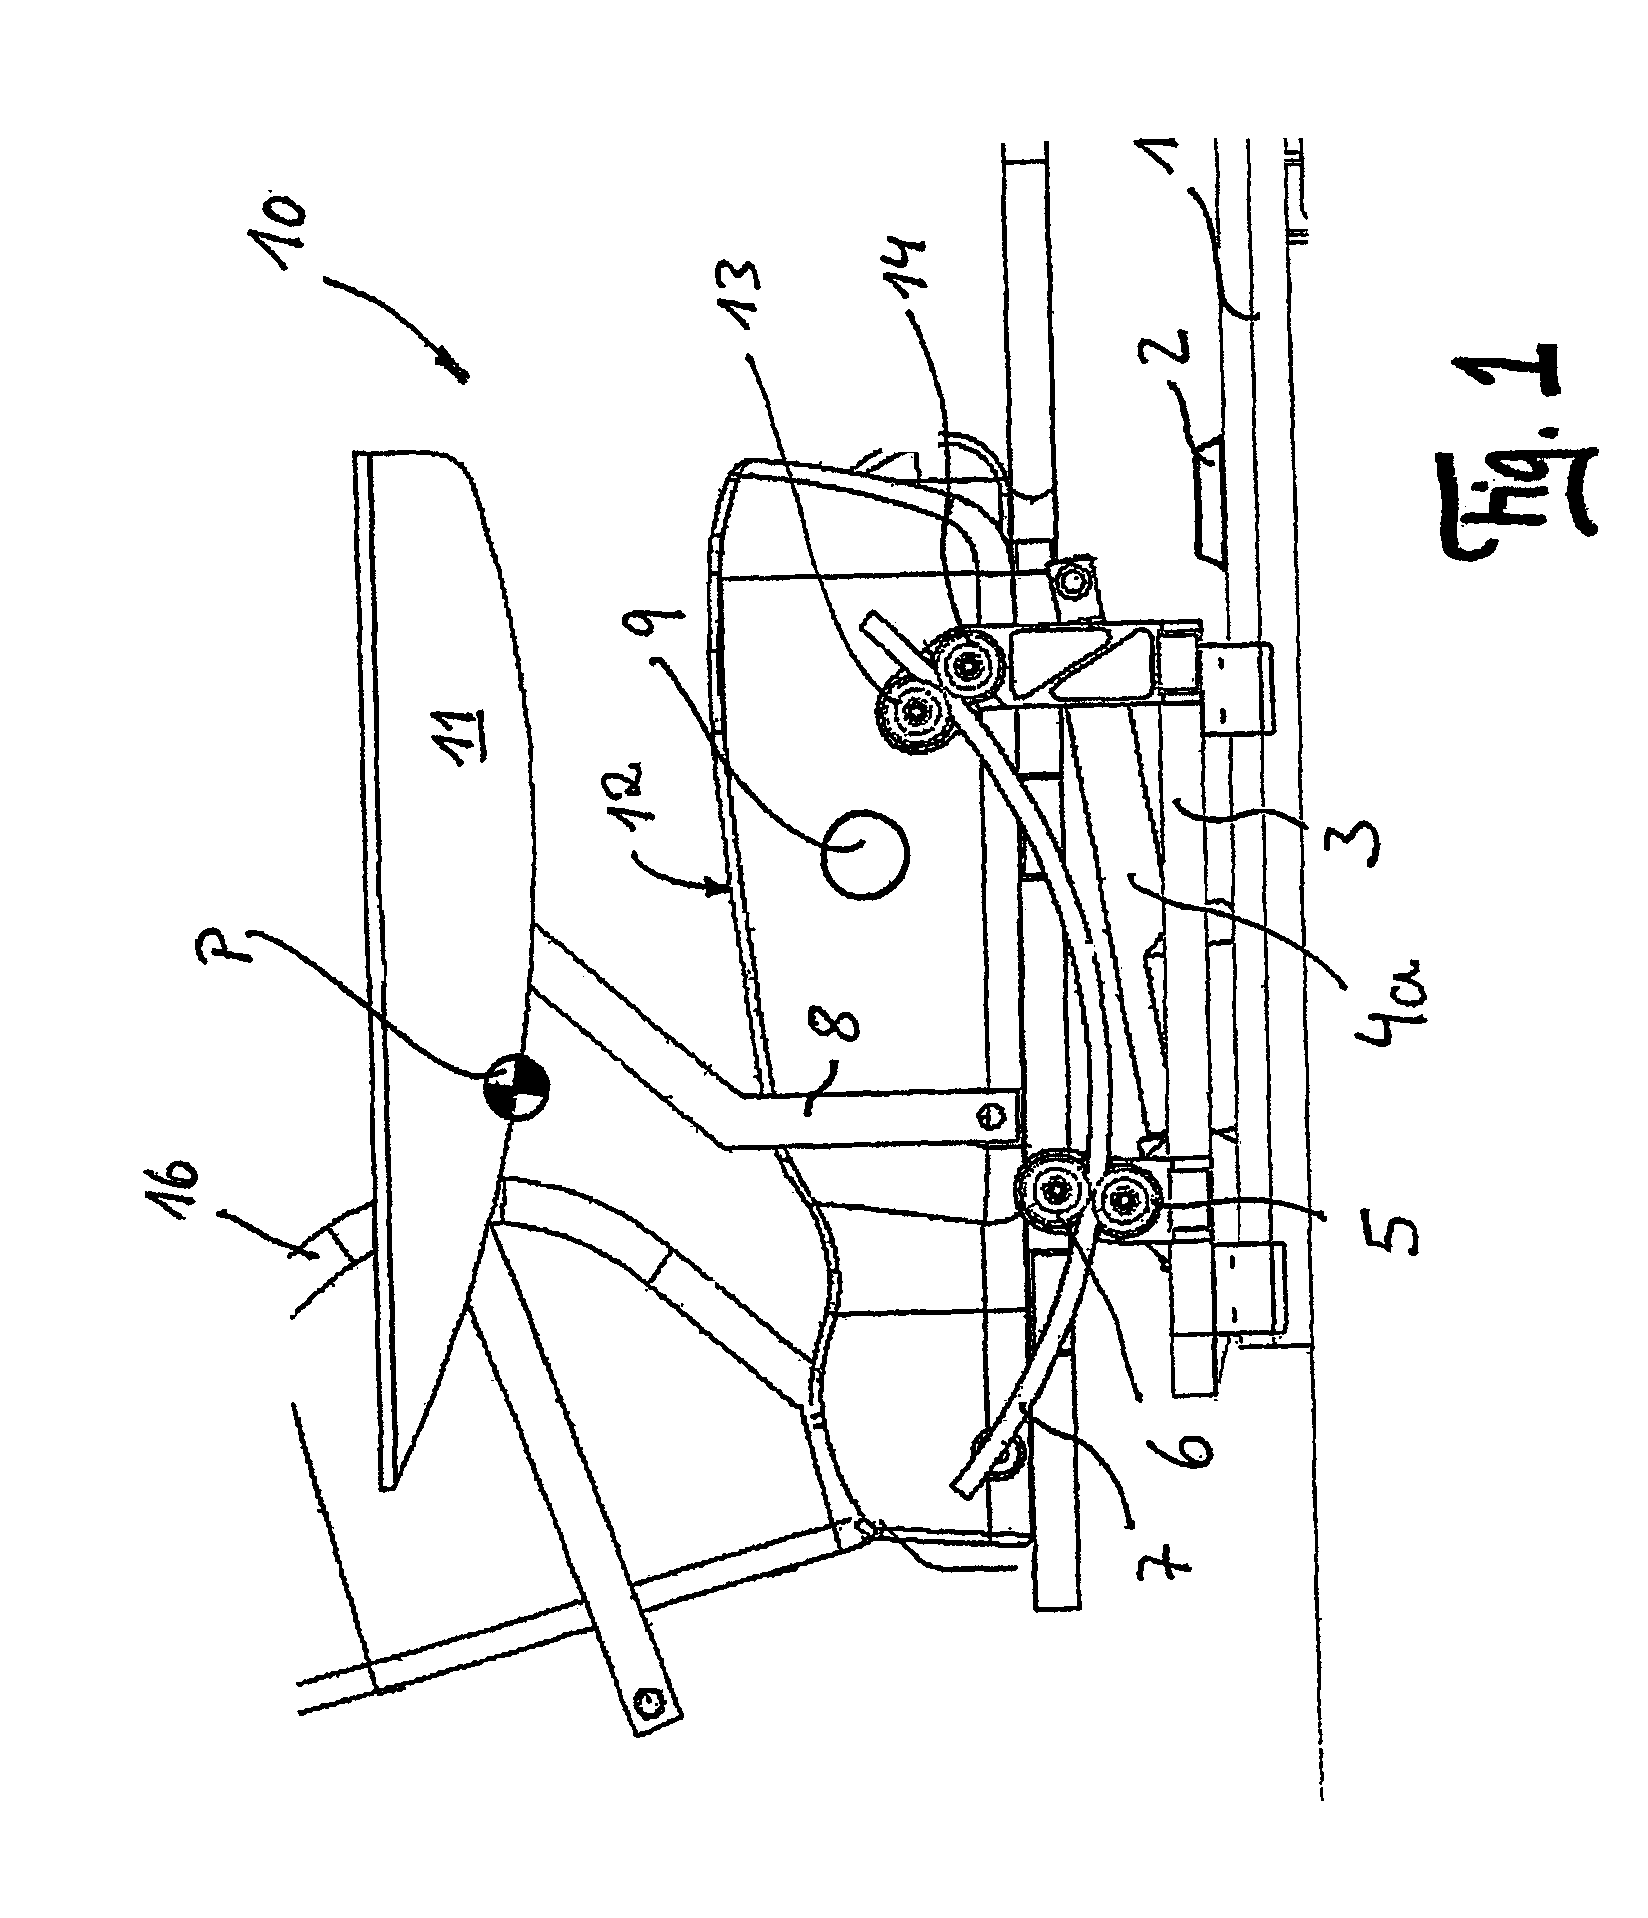 Vehicle with driver's seat with adjustable inclination